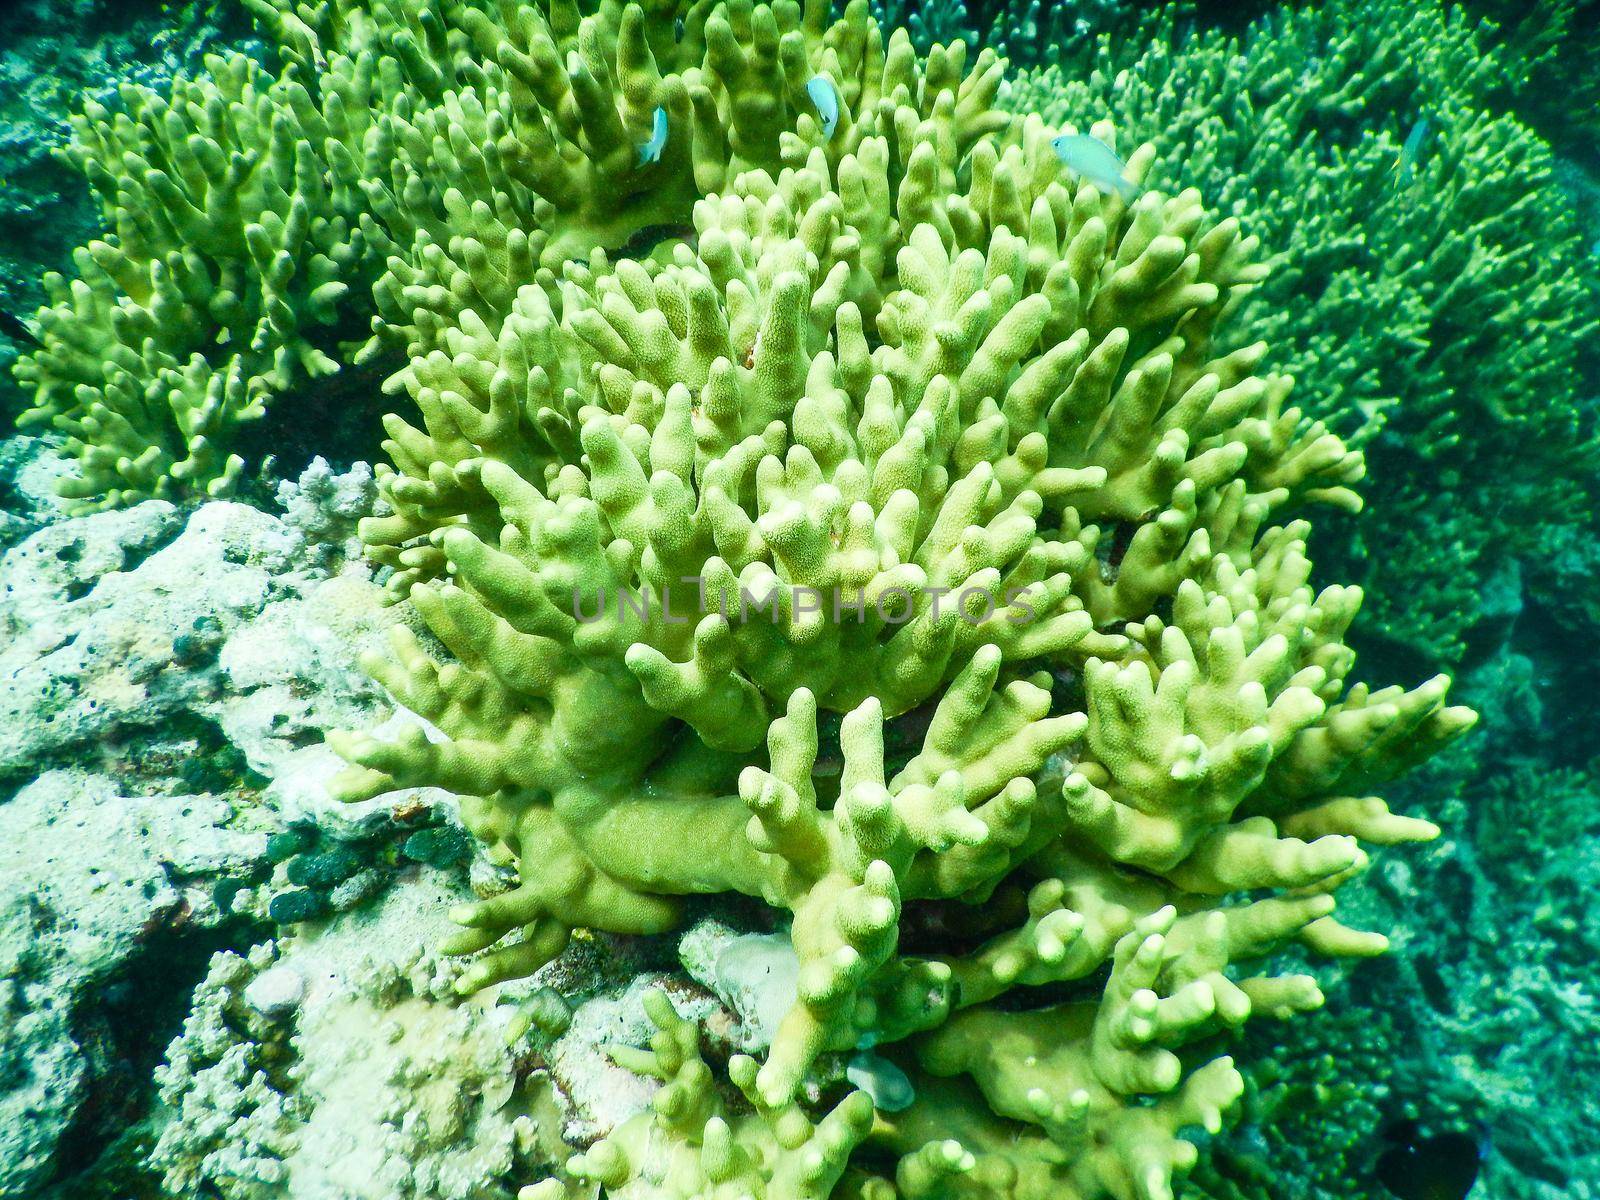 Maldives, a new coral that grows on the barrier destroyed by the 2004 tsunami